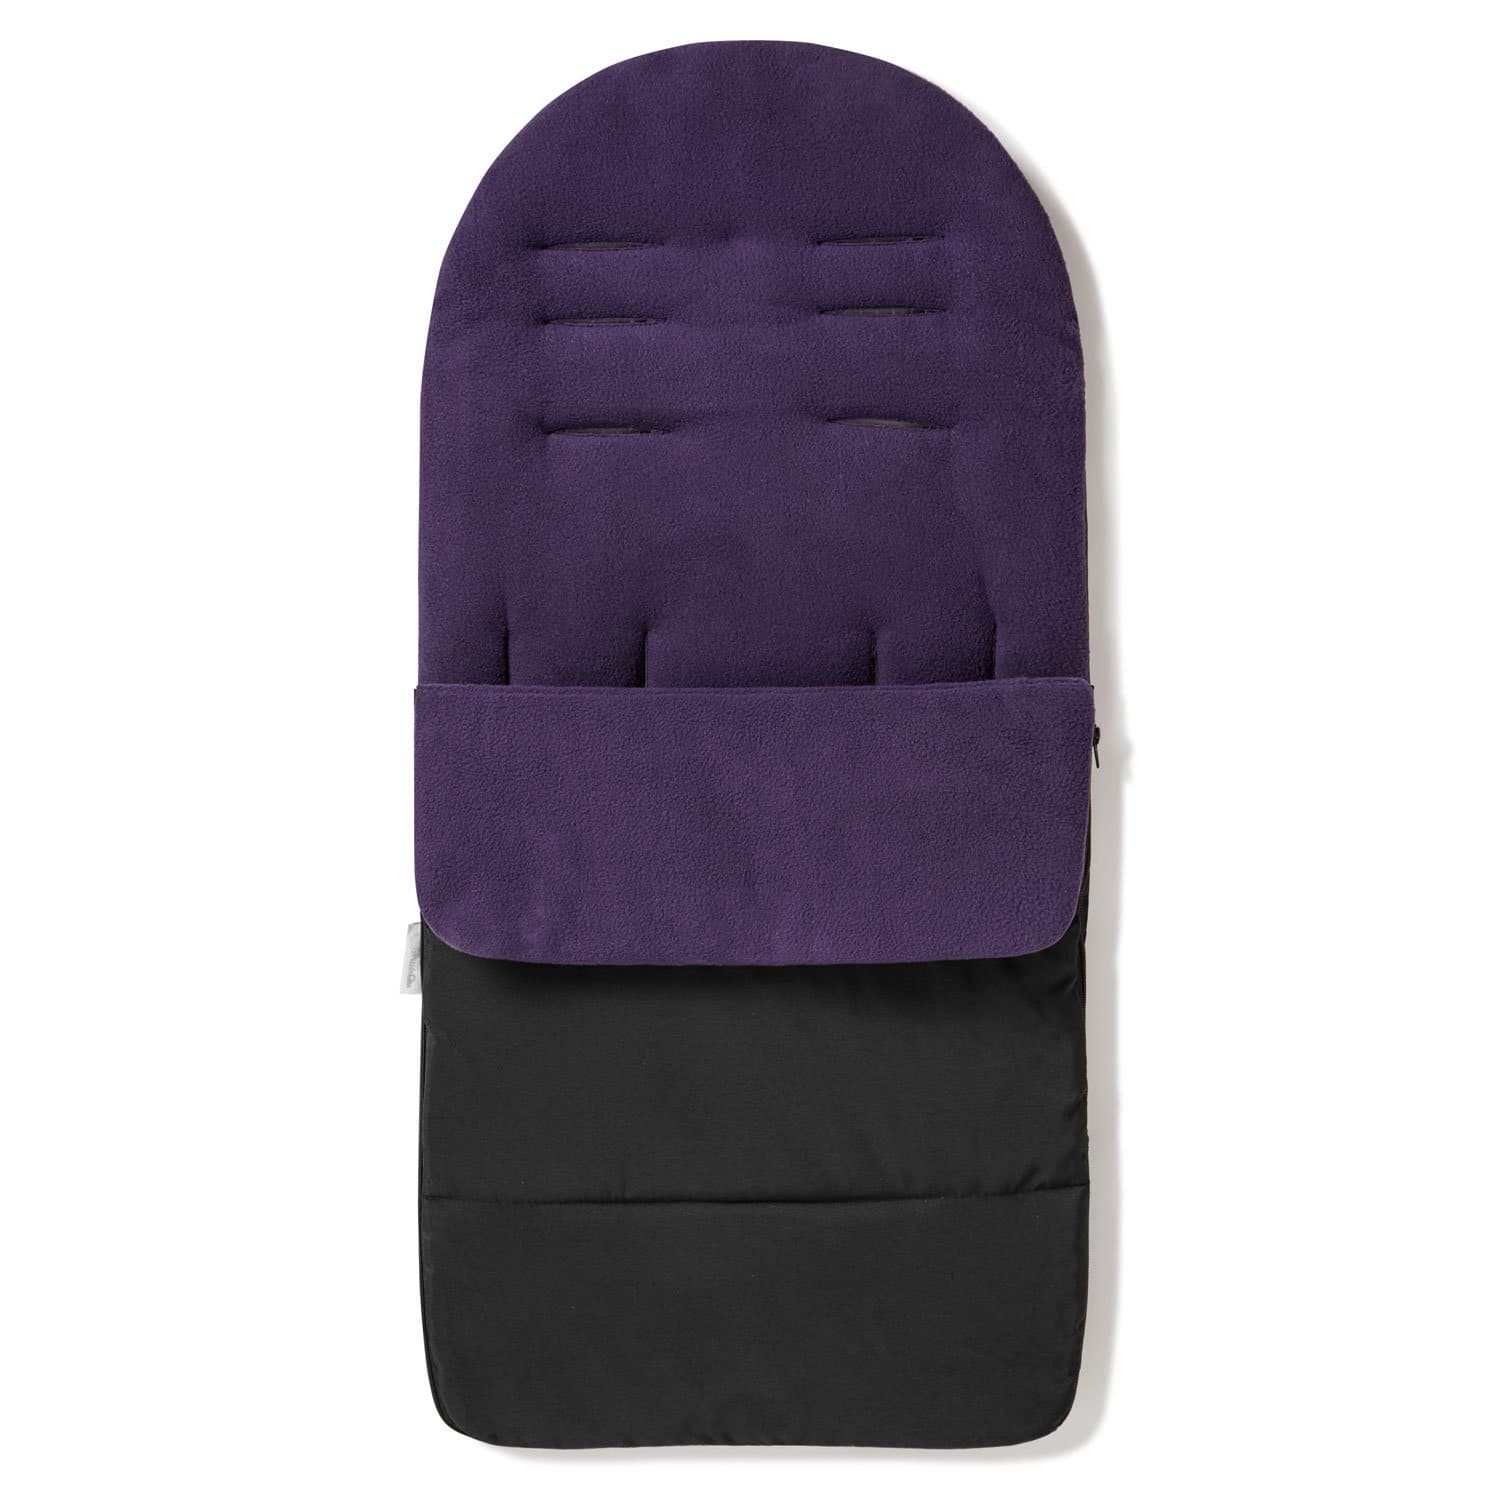 Premium Footmuff / Cosy Toes Compatible with Baby Trend - Plum Purple / Fits All Models | For Your Little One